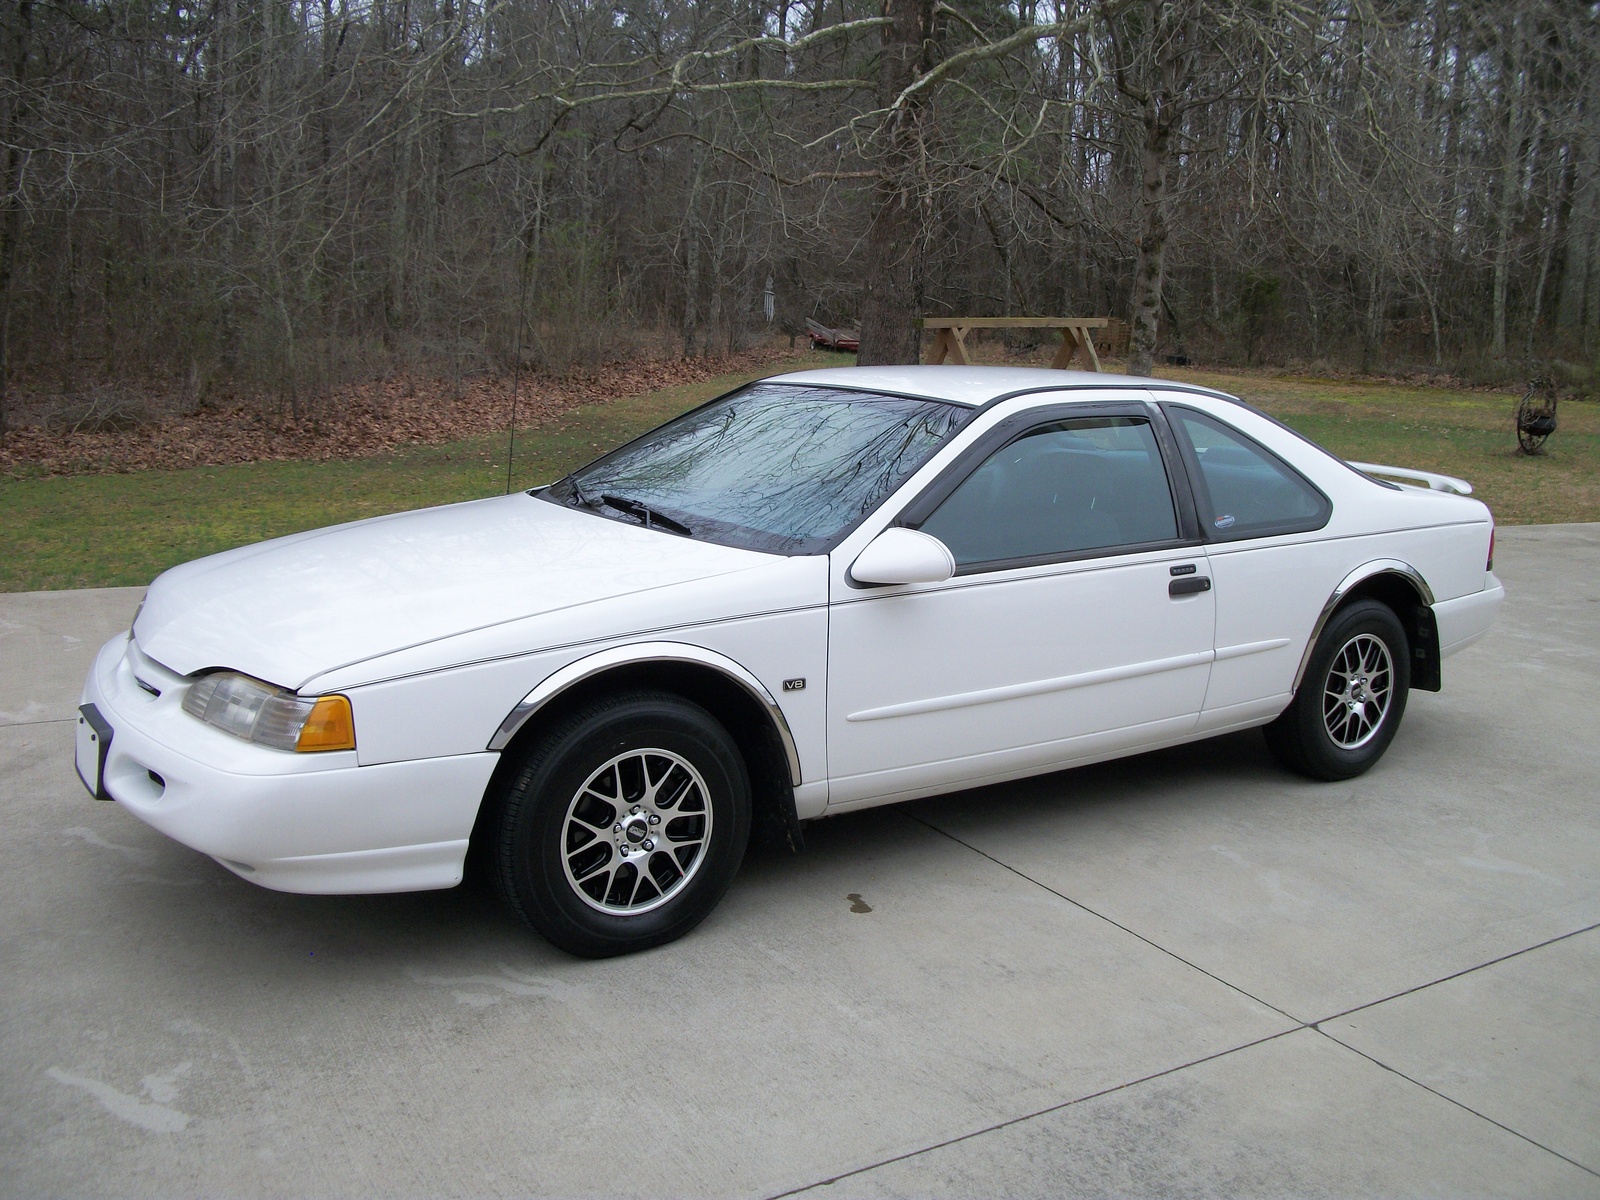 1995 Ford thunderbird lx review #7